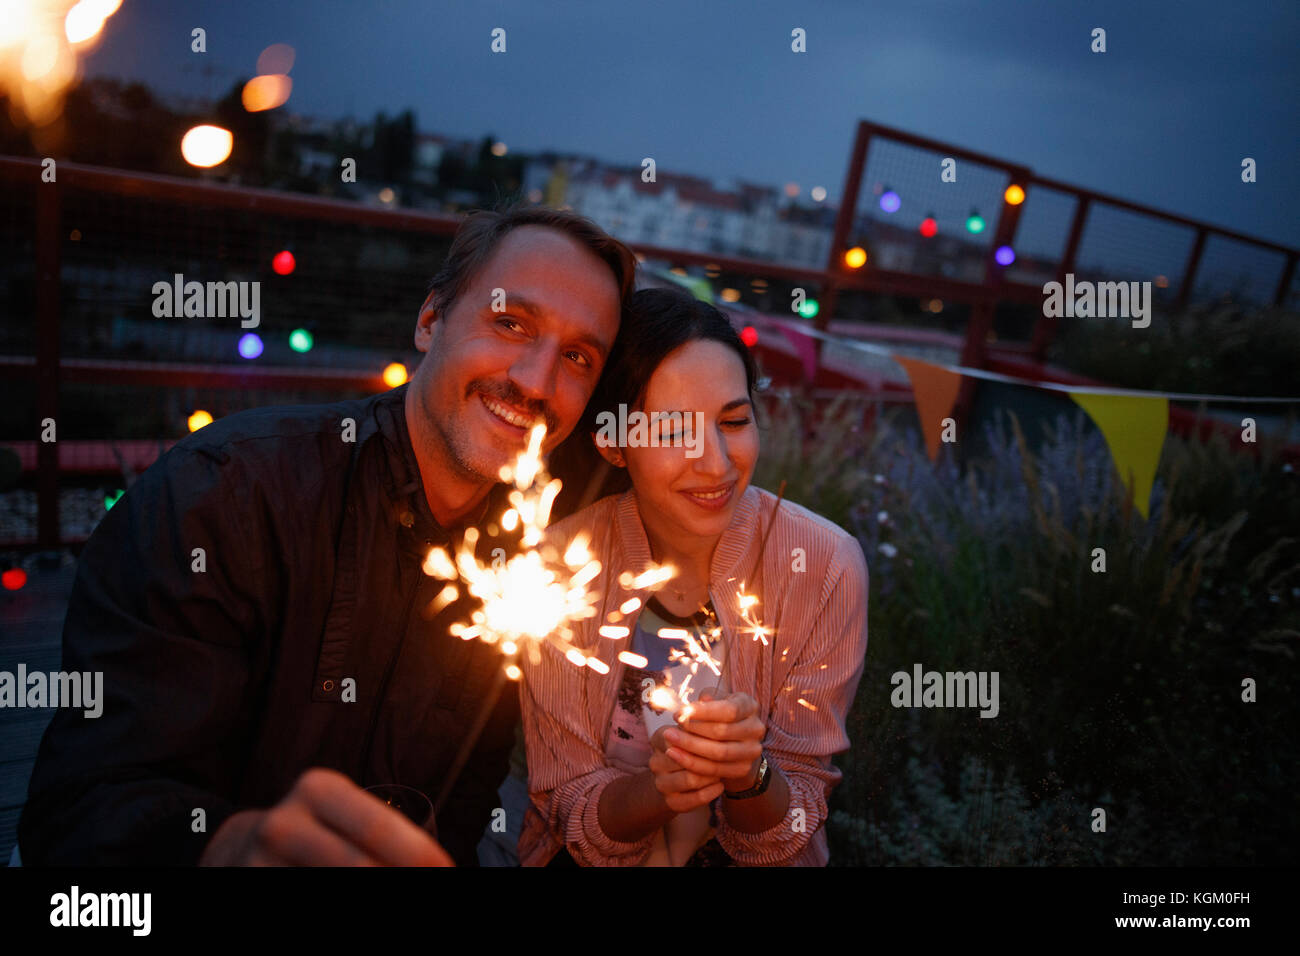 Happy couple holding sparklers on patio at night Stock Photo